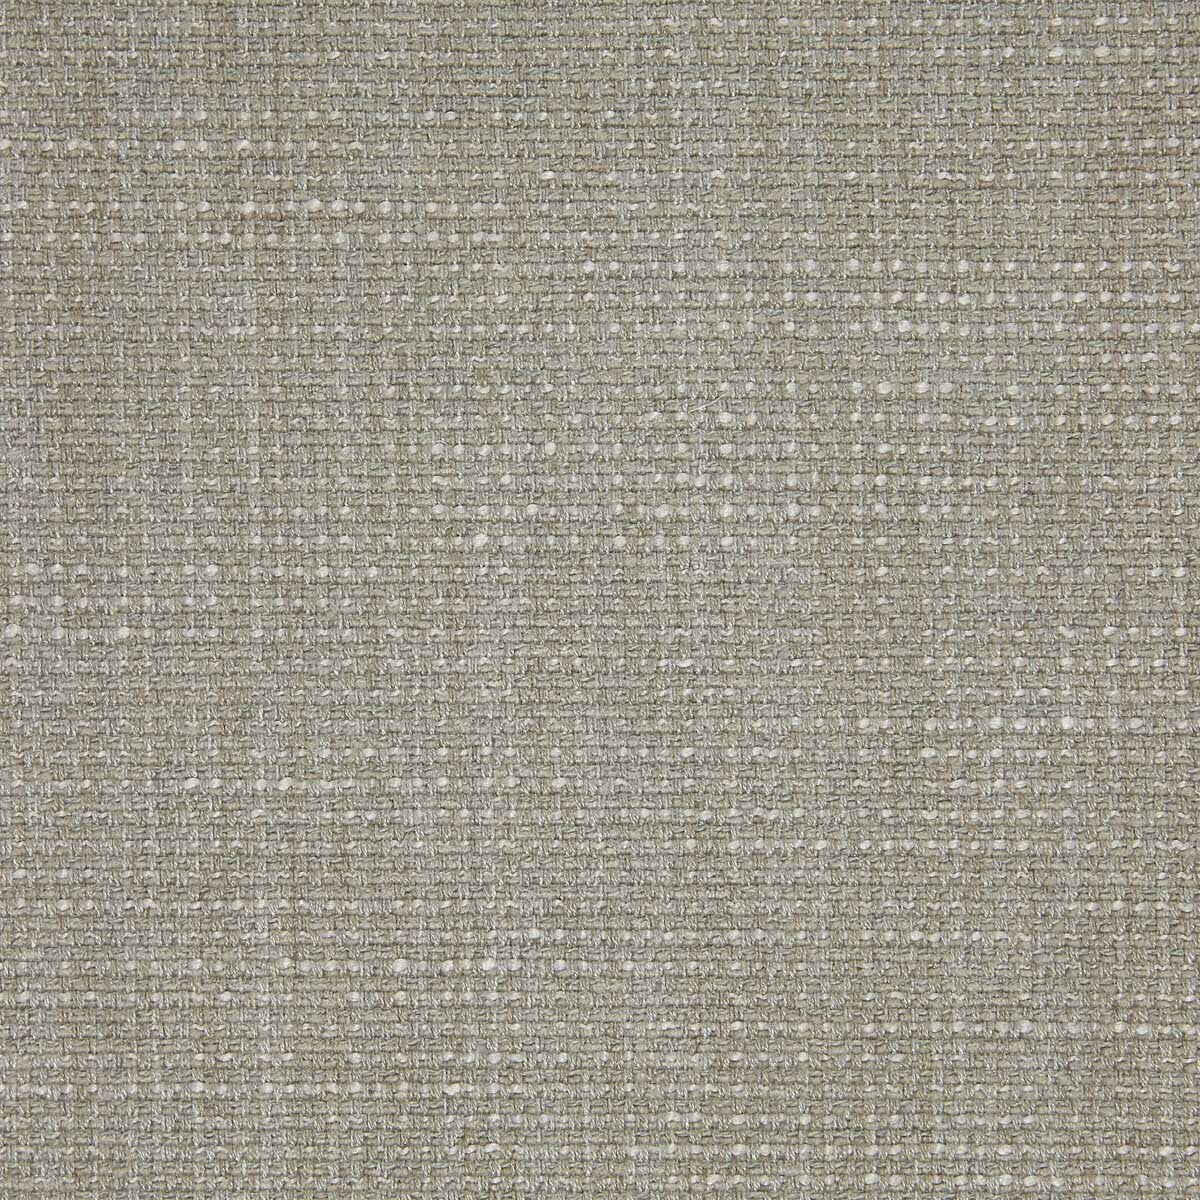 Godai fabric in 19 color - pattern LZ-30349.19.0 - by Kravet Design in the Lizzo collection